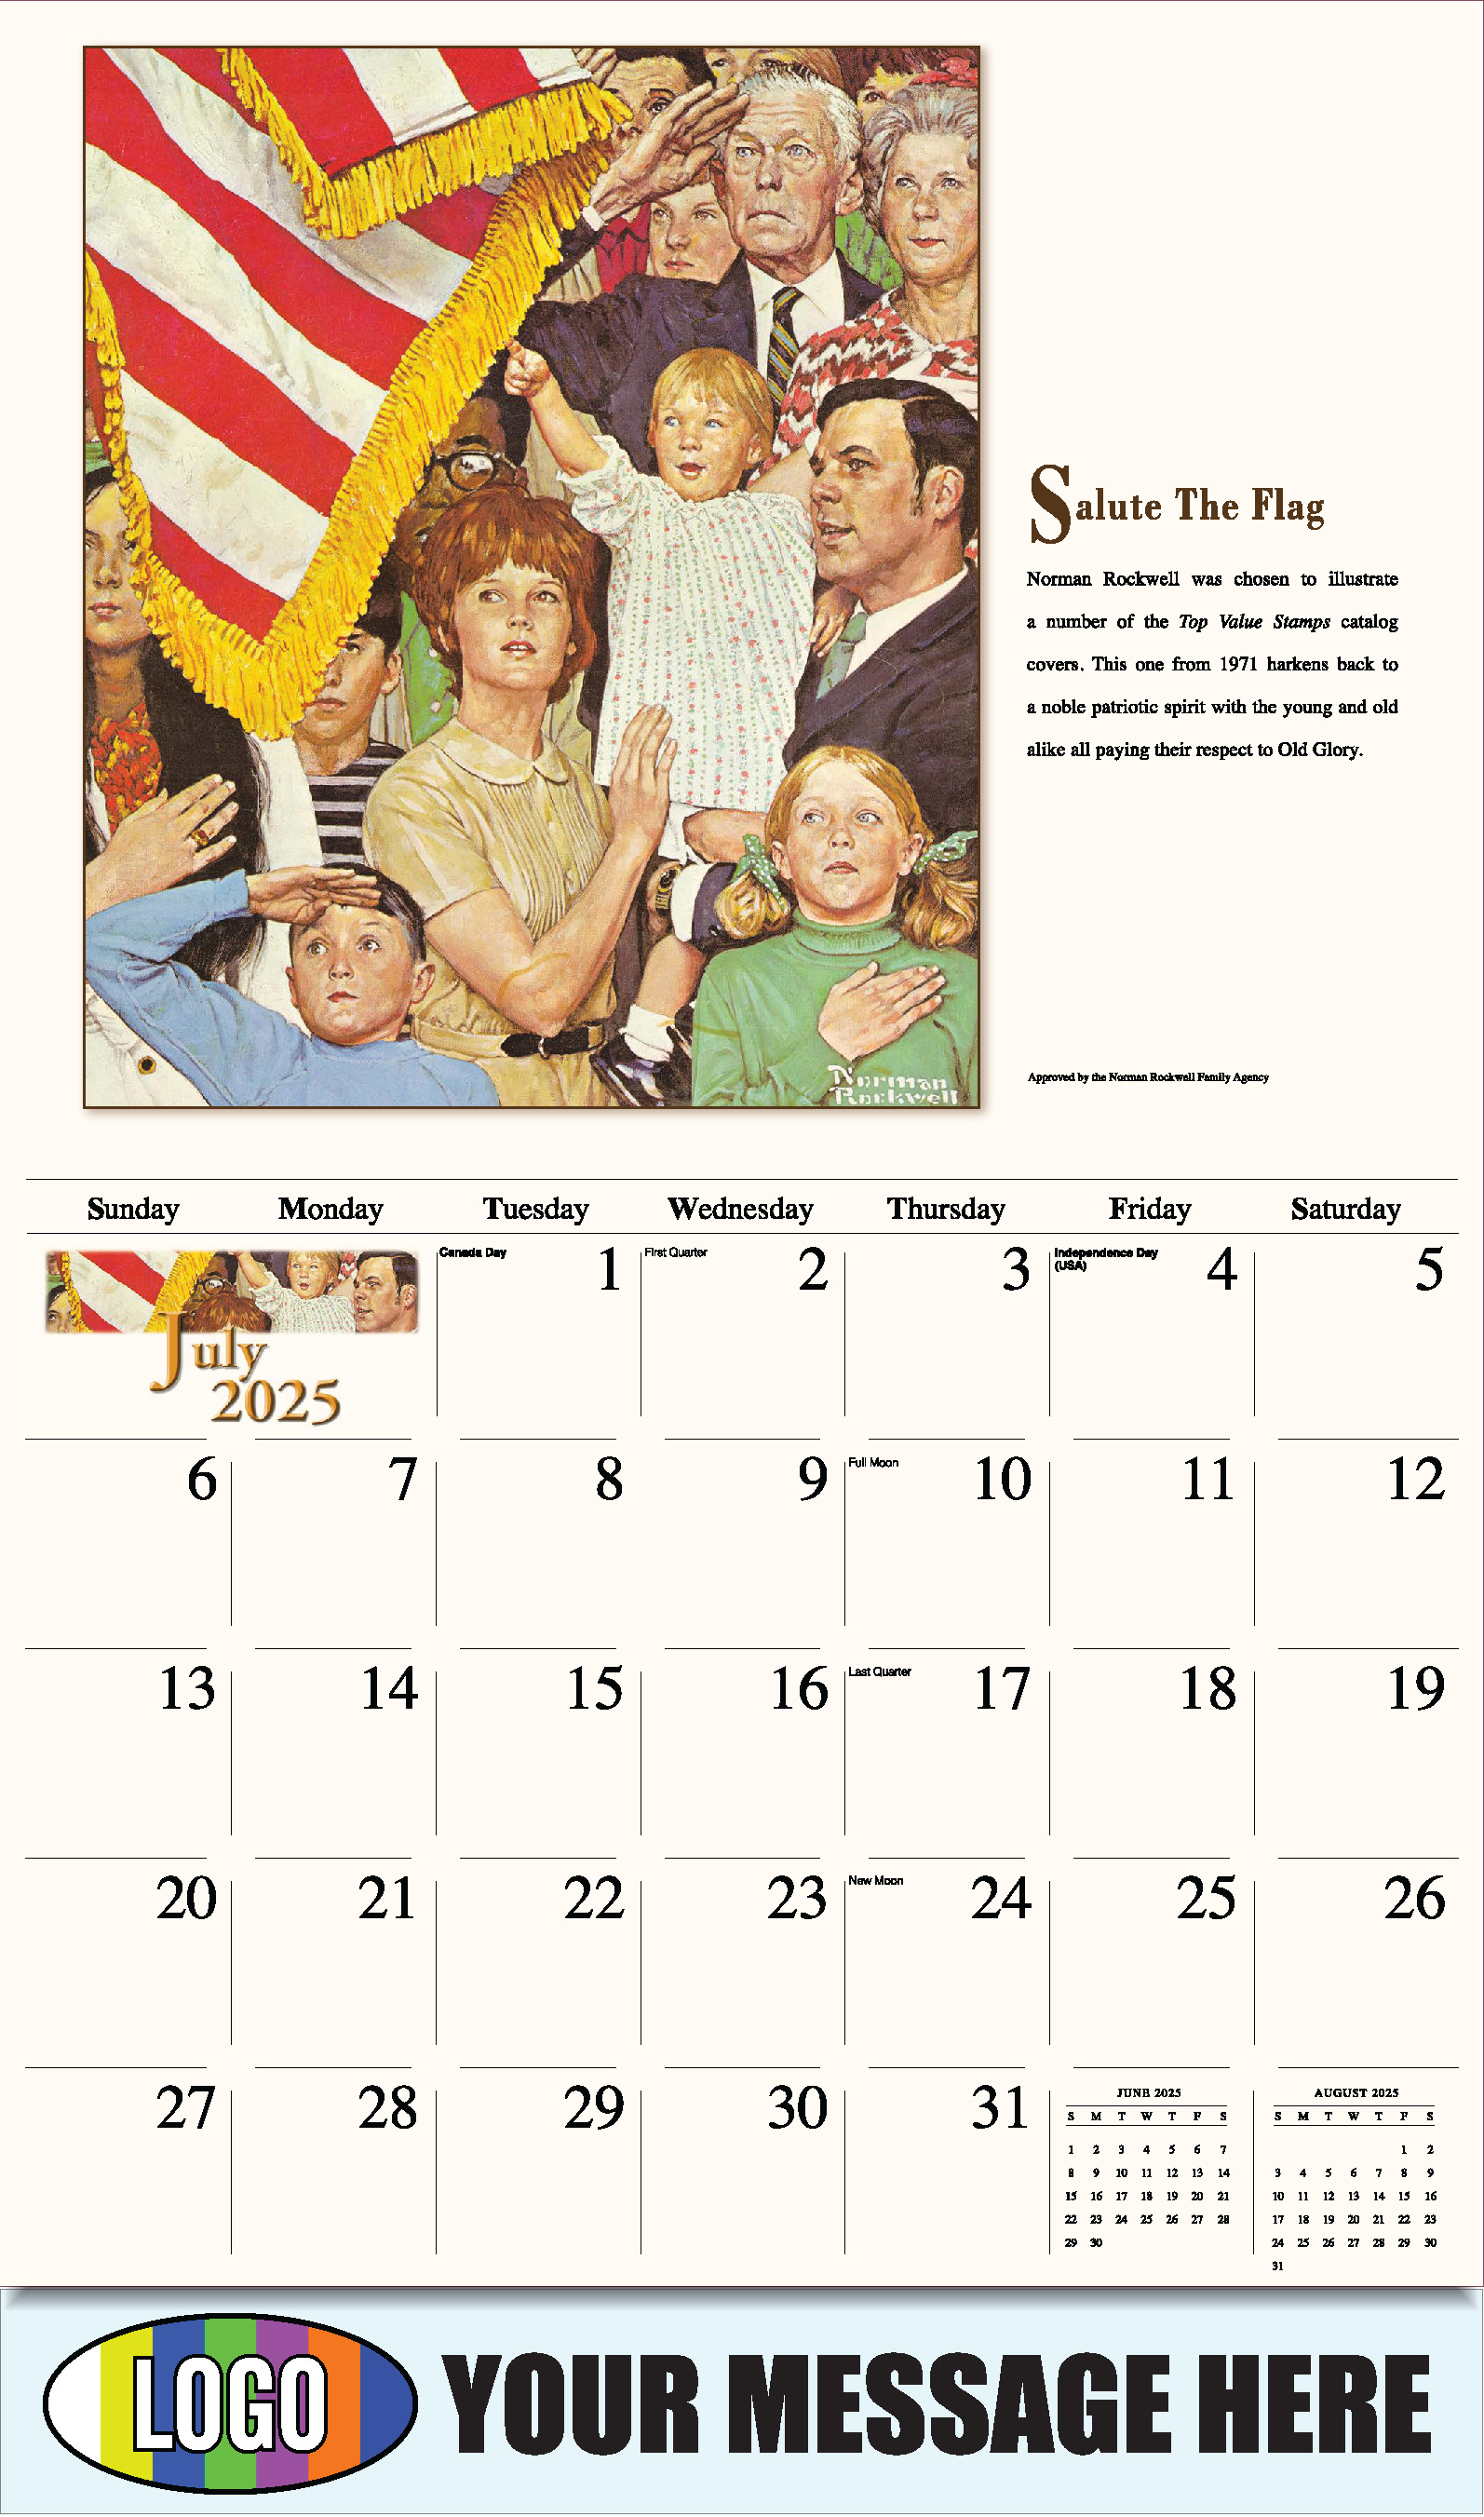 Memorable Images by Norman Rockwell 2025 Business Promotional Wall Calendar - July